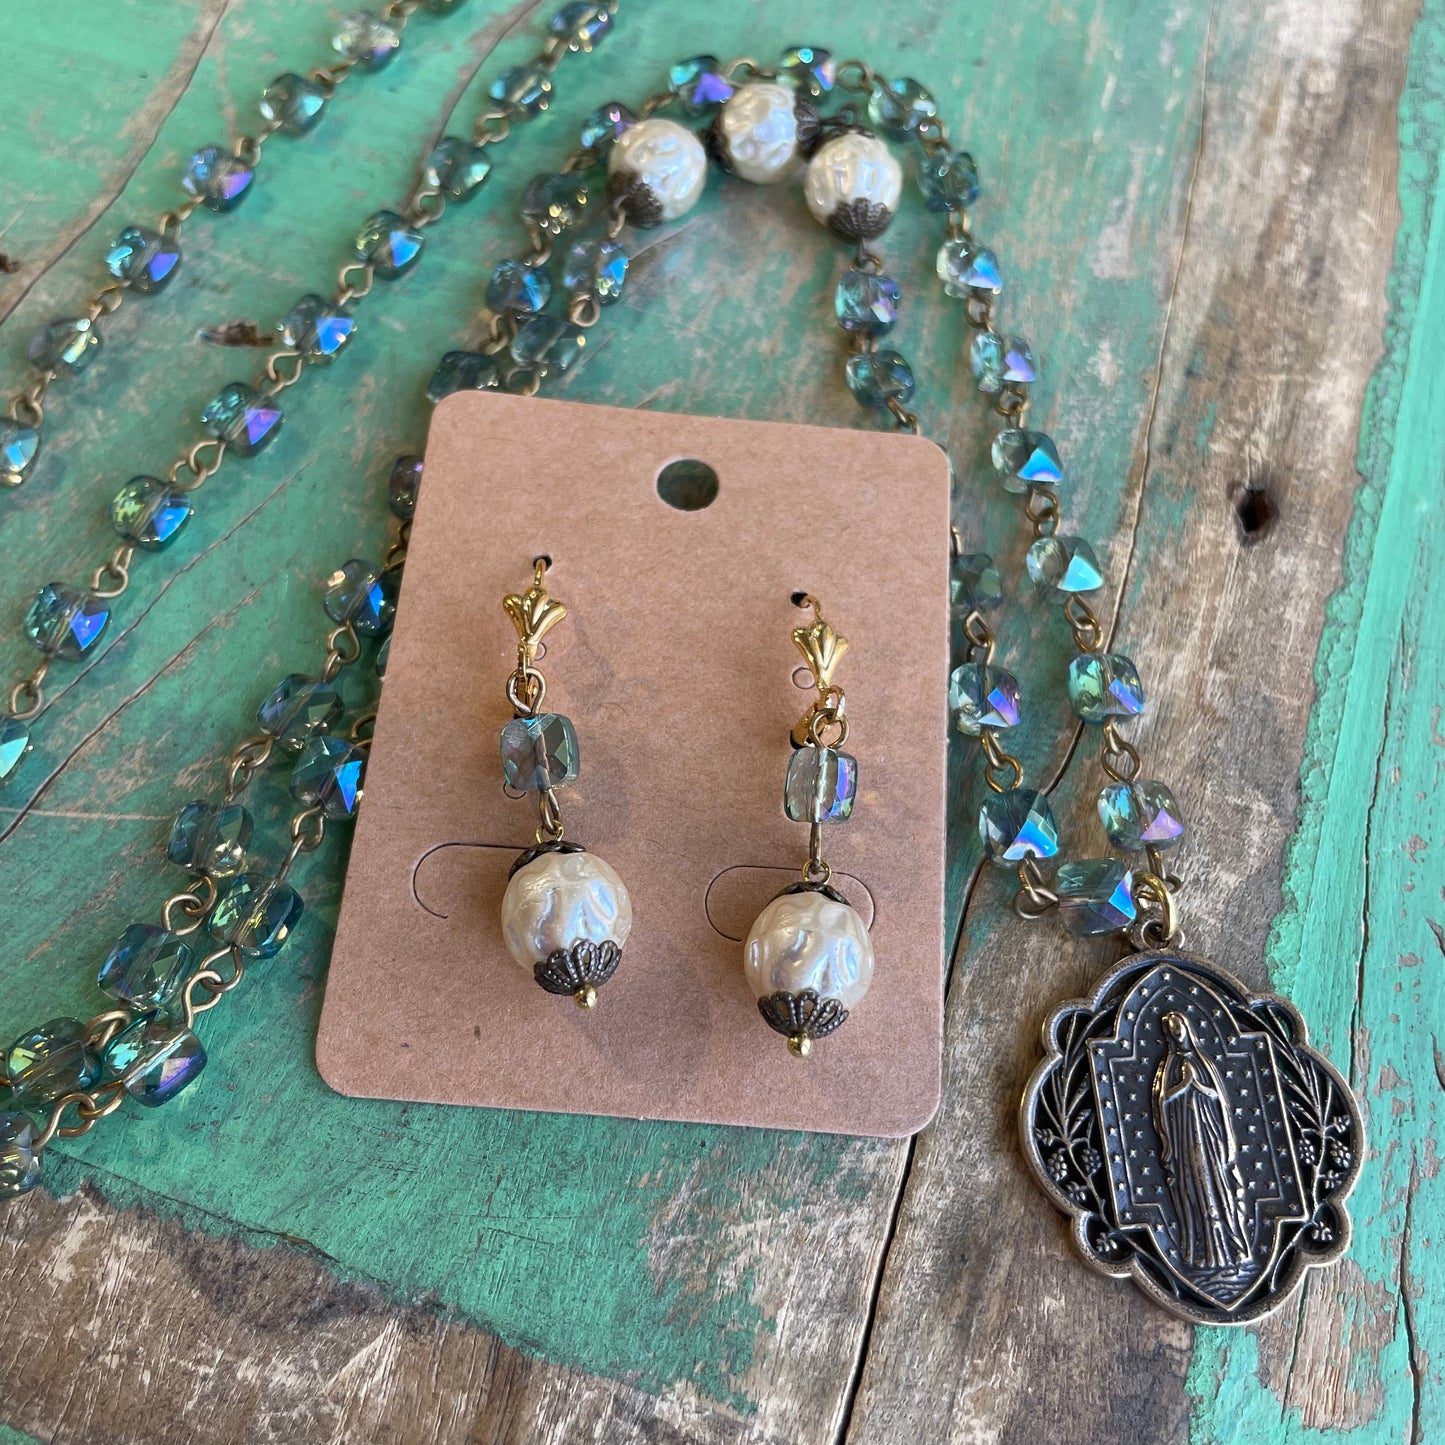 Our Lady Iridescent Necklace and Earrings